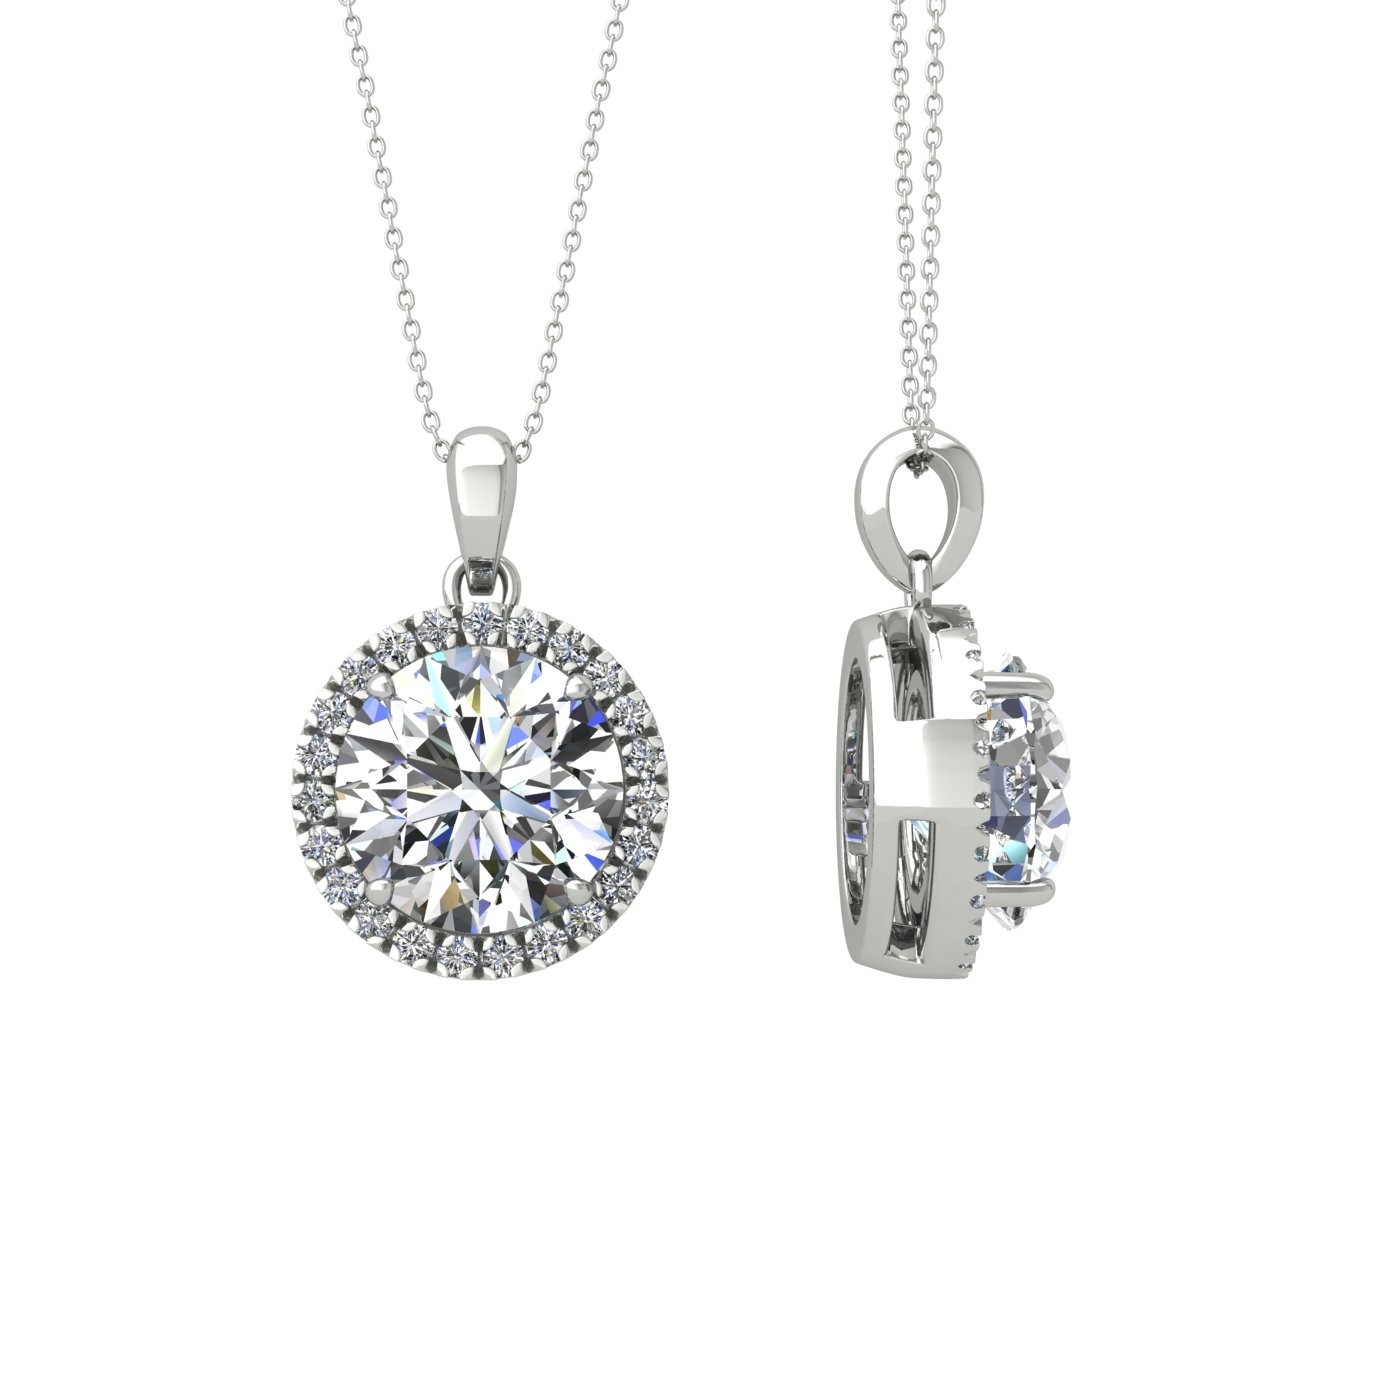 18K WHITE GOLD 4 PRONG ROUND SHAPE DIAMOND PENDANT WITH DIAMOND PAVE SET HALO INCLUDING CHAIN SEPERATE FROM THE PENDANT